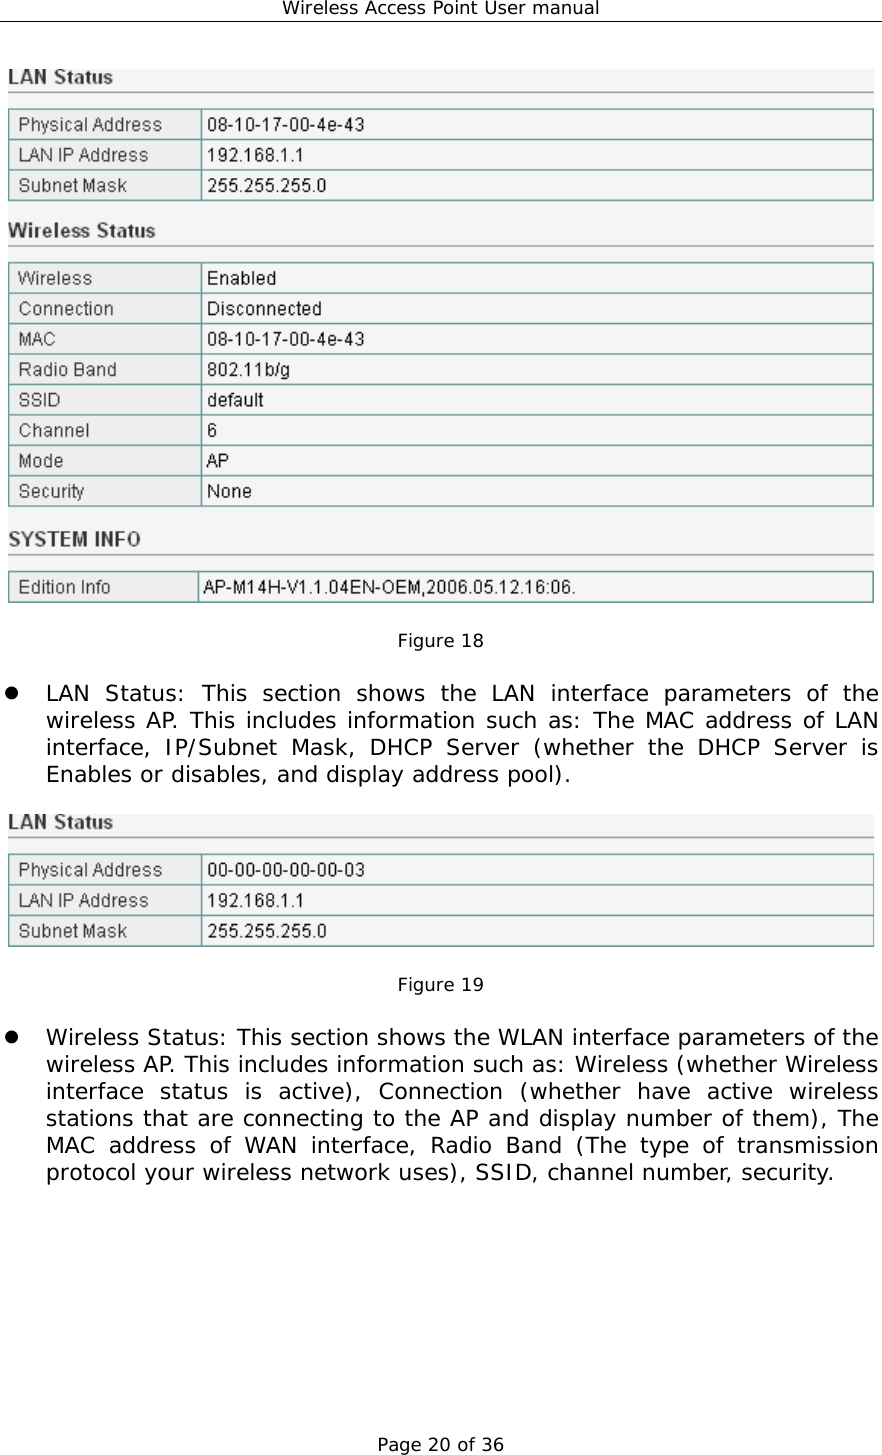 Wireless Access Point User manual Page 20 of 36   Figure 18  z LAN Status: This section shows the LAN interface parameters of the wireless AP. This includes information such as: The MAC address of LAN interface, IP/Subnet Mask, DHCP Server (whether the DHCP Server is Enables or disables, and display address pool).    Figure 19  z Wireless Status: This section shows the WLAN interface parameters of the wireless AP. This includes information such as: Wireless (whether Wireless interface status is active), Connection (whether have active wireless stations that are connecting to the AP and display number of them), The MAC address of WAN interface, Radio Band (The type of transmission protocol your wireless network uses), SSID, channel number, security.  